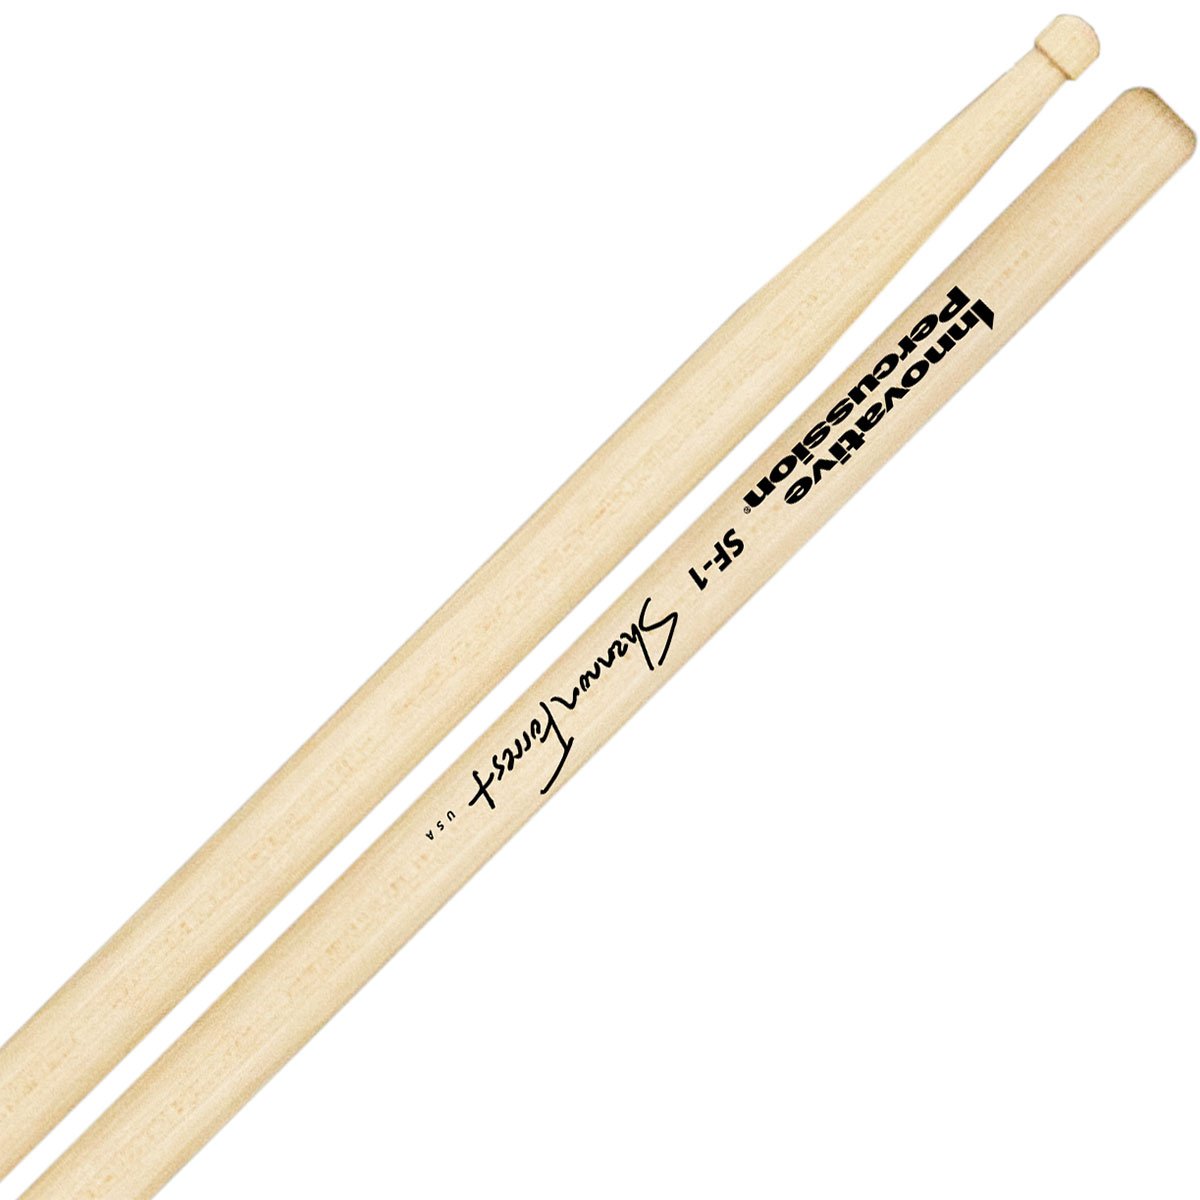 Innovative Percussion - SF-1 Shannon Forrest Signature Drumset Drumsticks